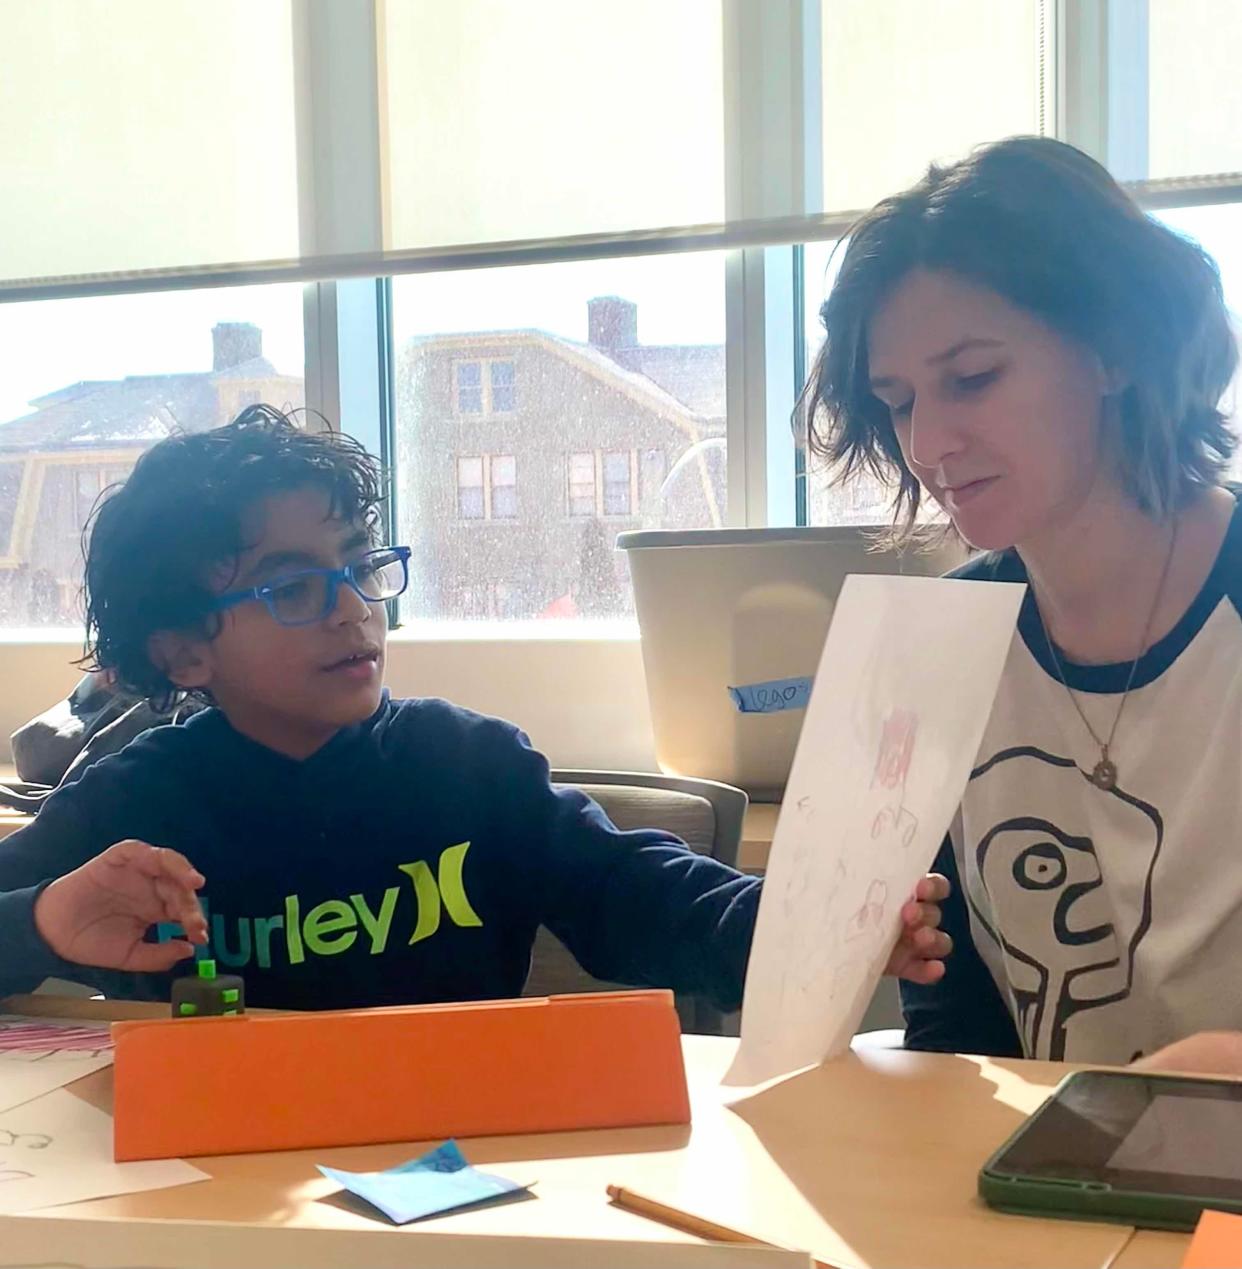 Islands of Brilliance student Julian works with his mentor, Tess, on a project. Islands of Brilliance pairs autistic students with mentors to create projects based upon the students' special areas of interest.